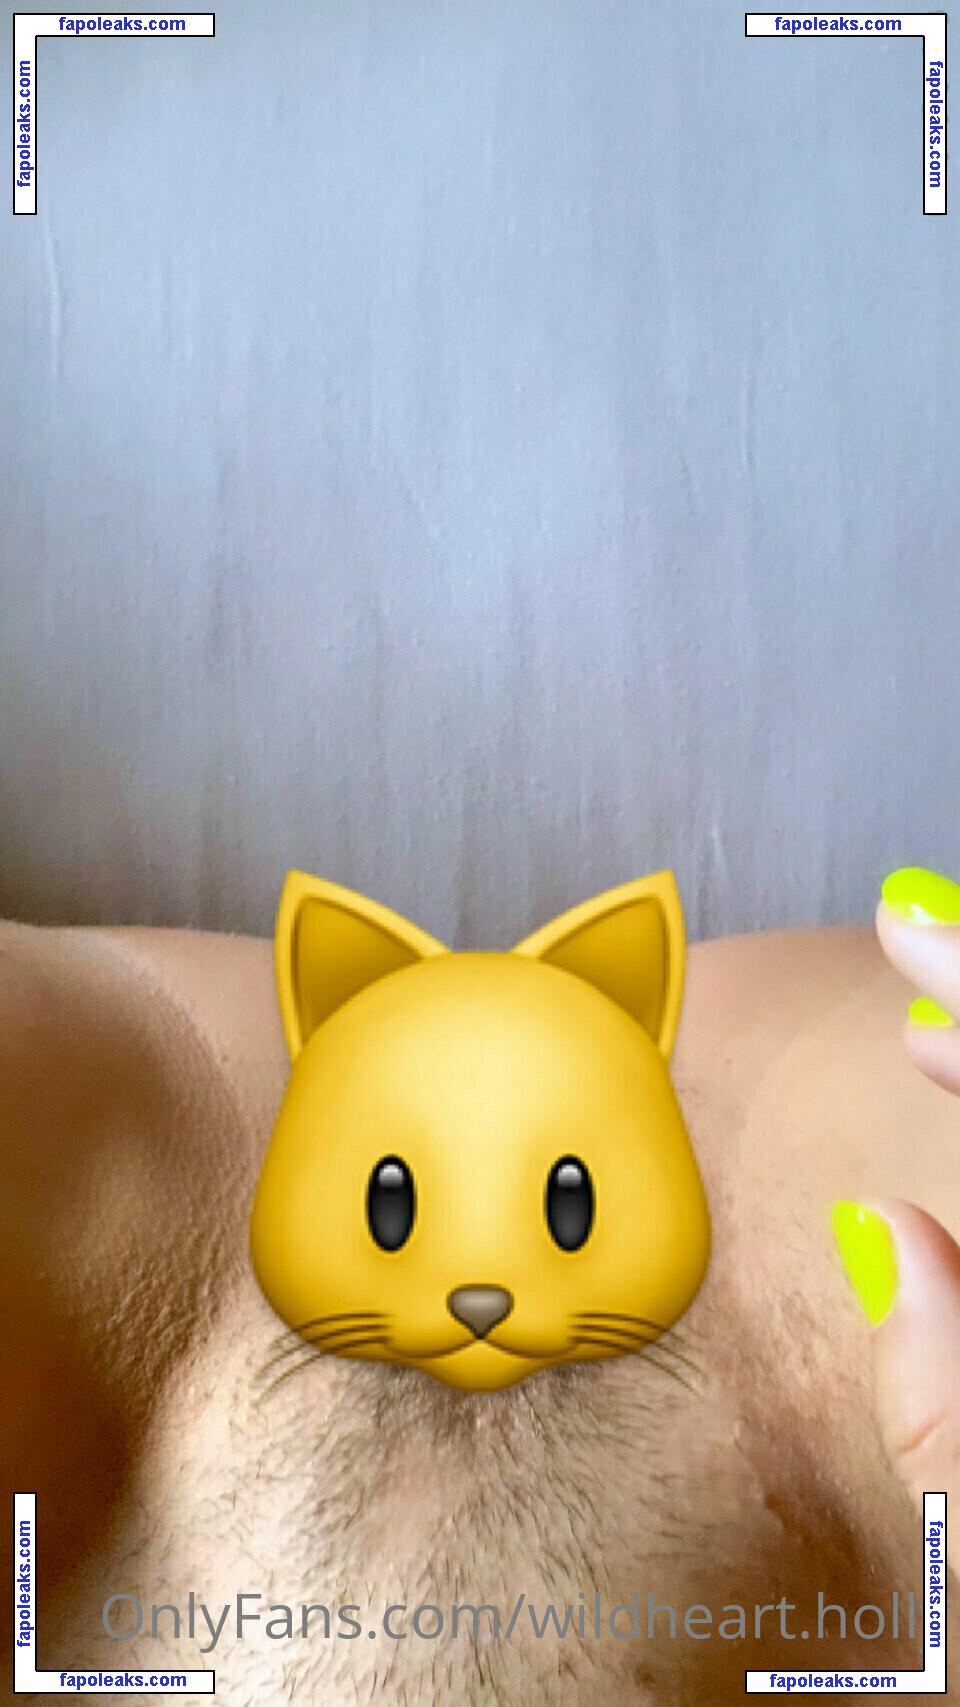 wildheart.holly / thecaptainswordislaw nude photo #0070 from OnlyFans